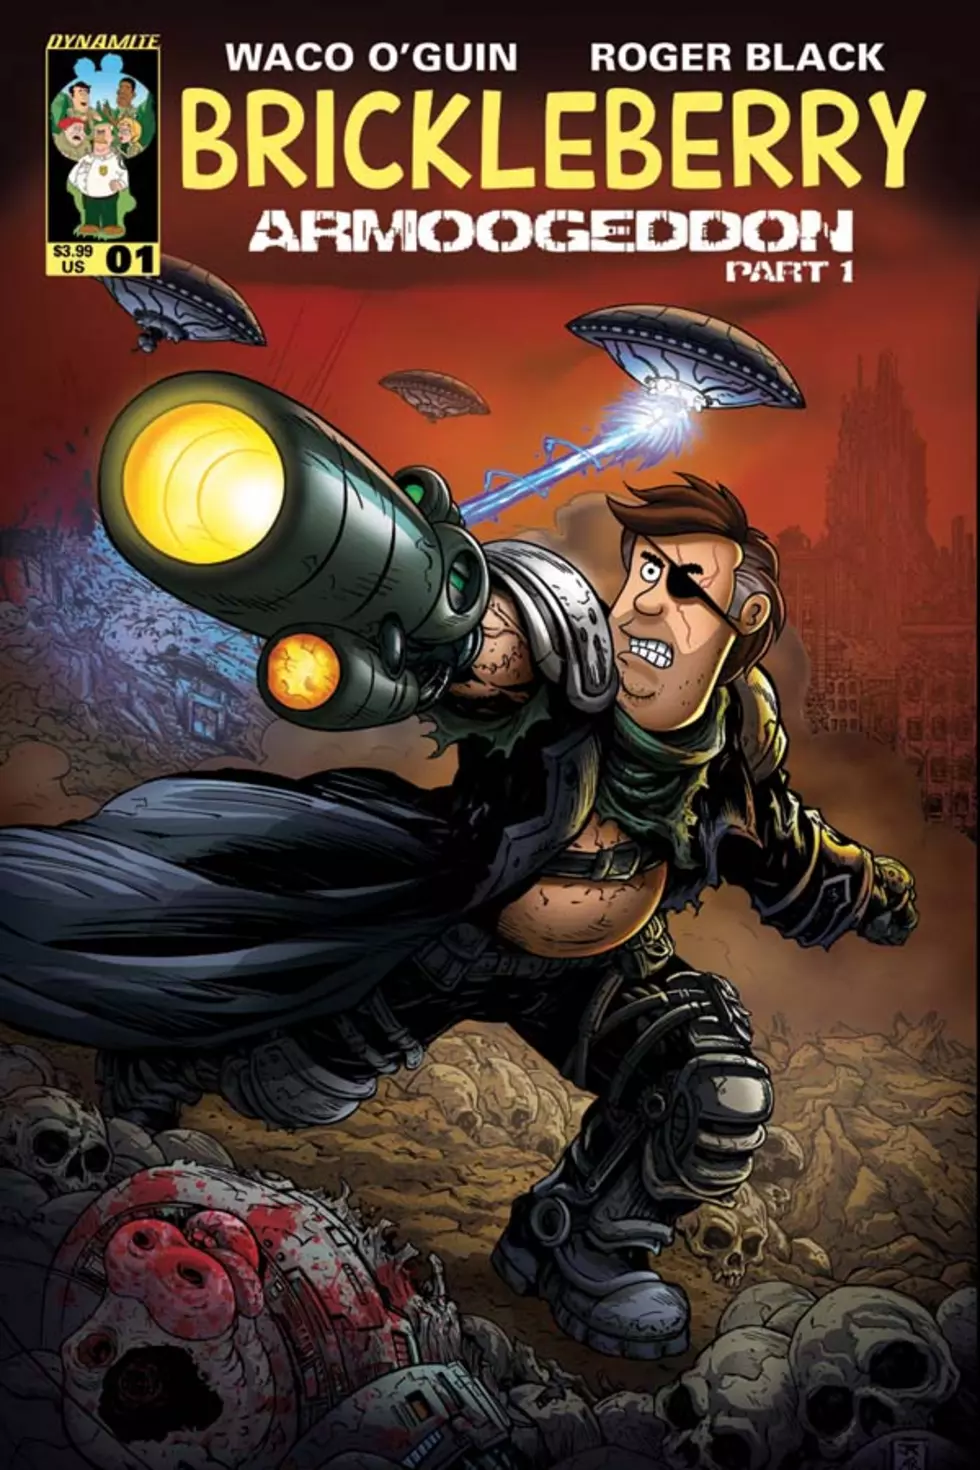 Dynamite® Jim Butcher's The Dresden Files: Wild Card #1 (Of 6